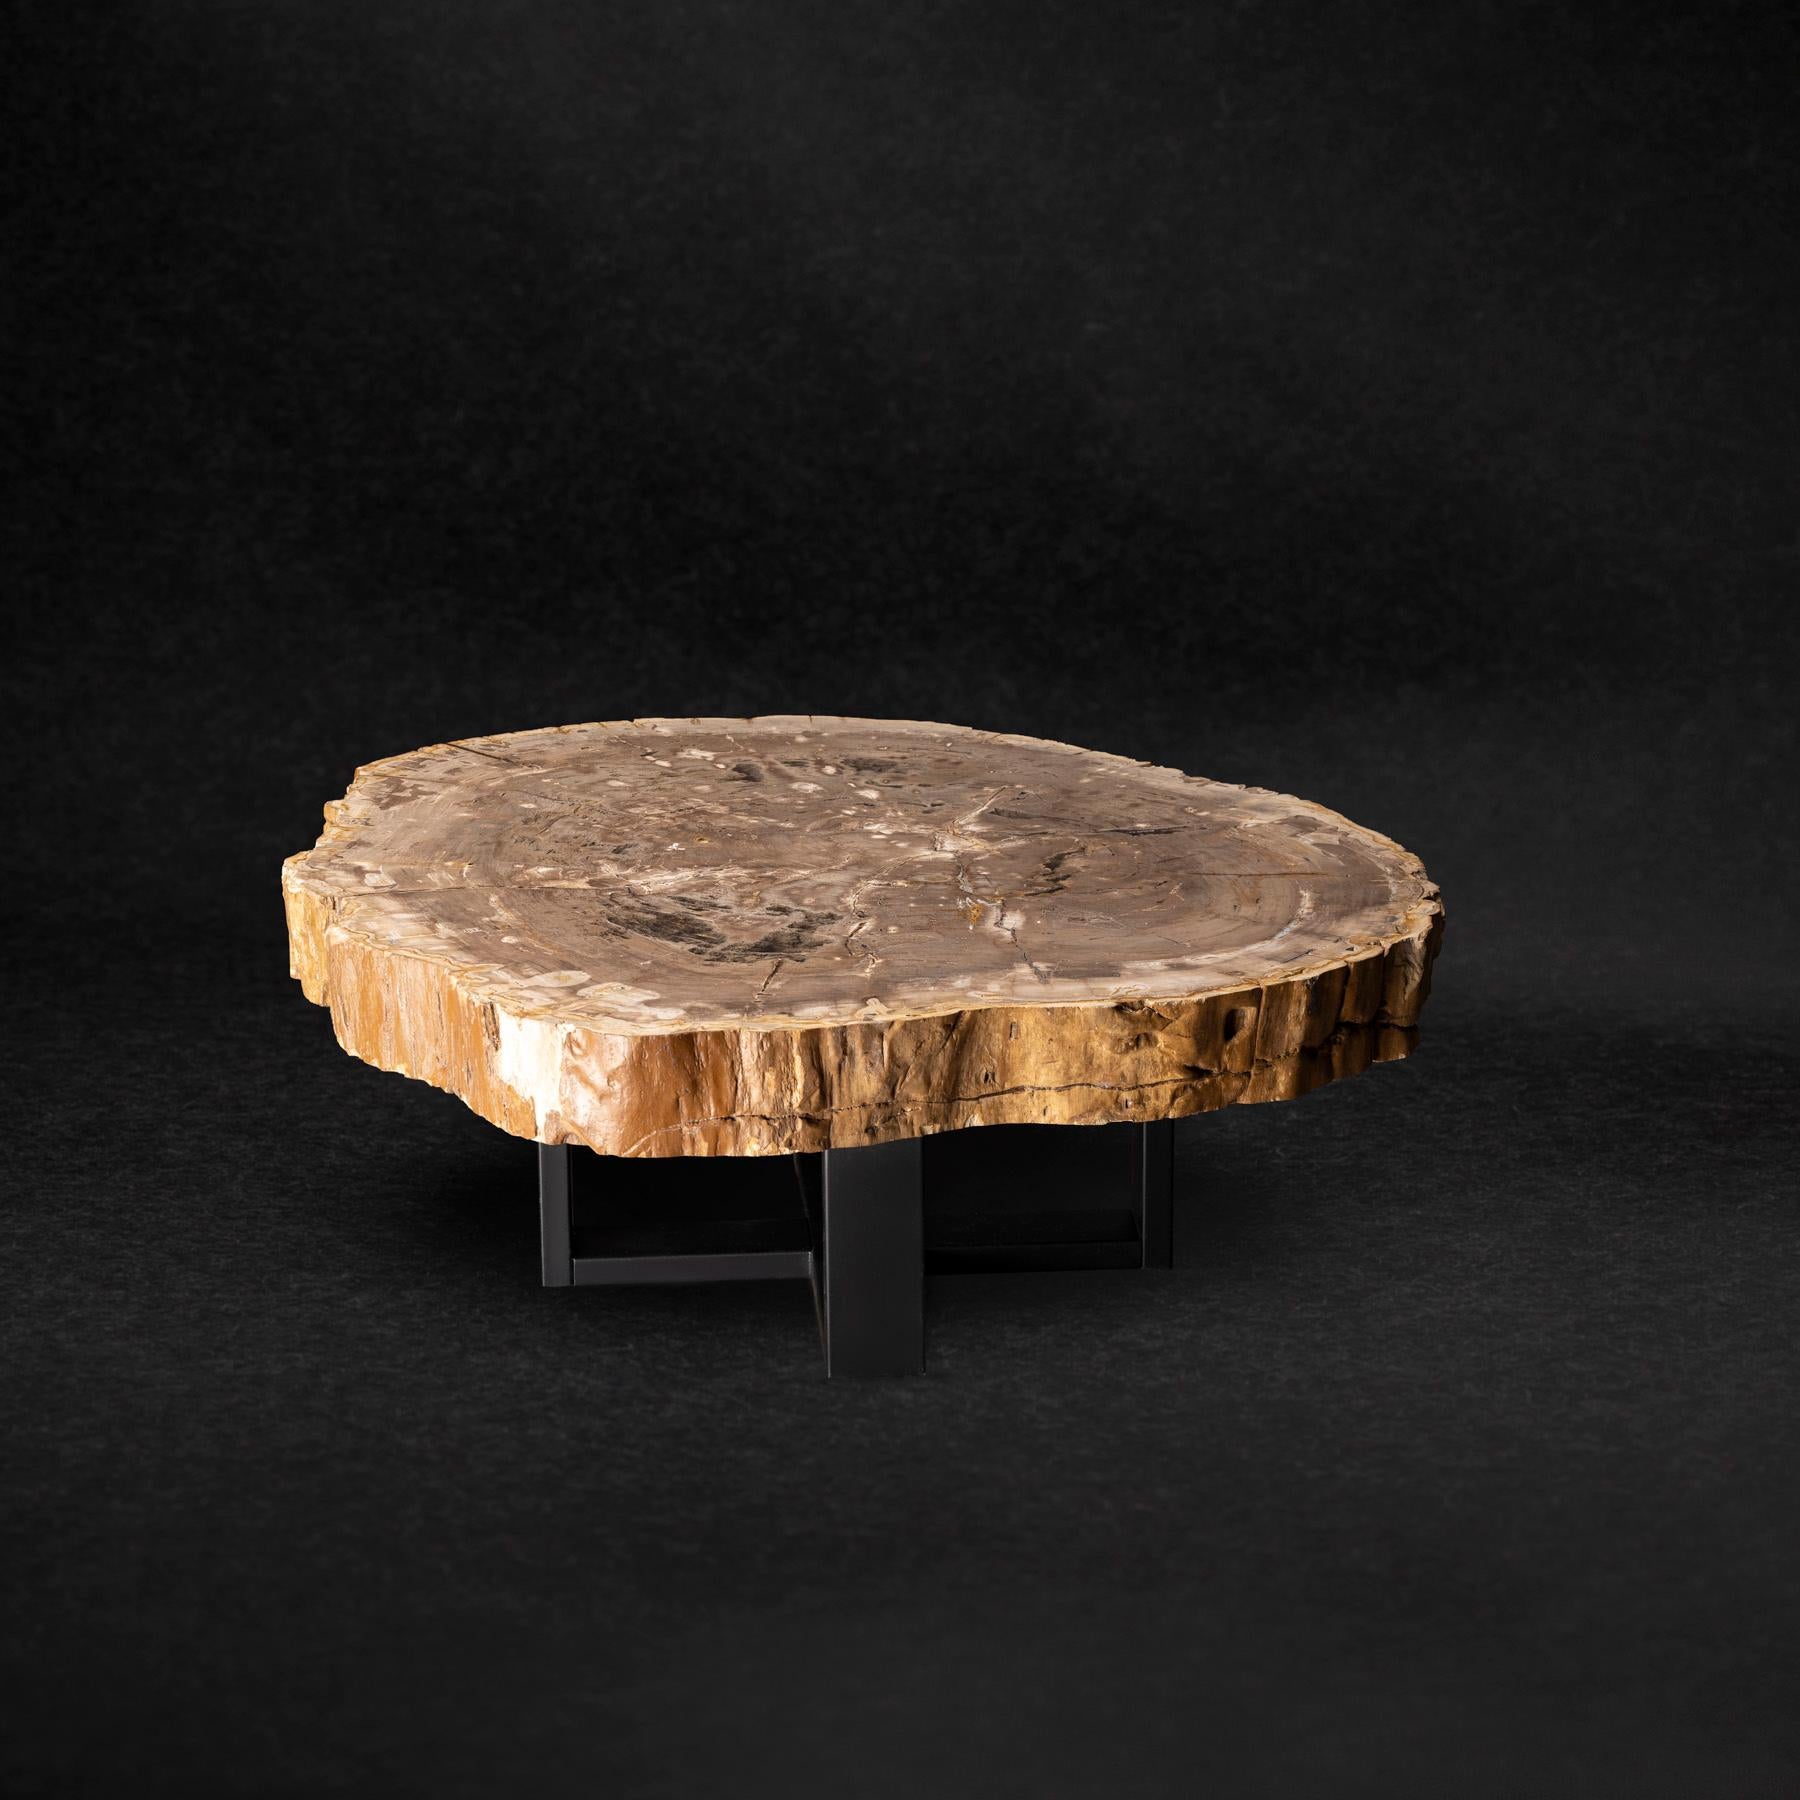 Organic Modern Center or Coffee Table, Natural Shape, Petrified Wood with Metal Base